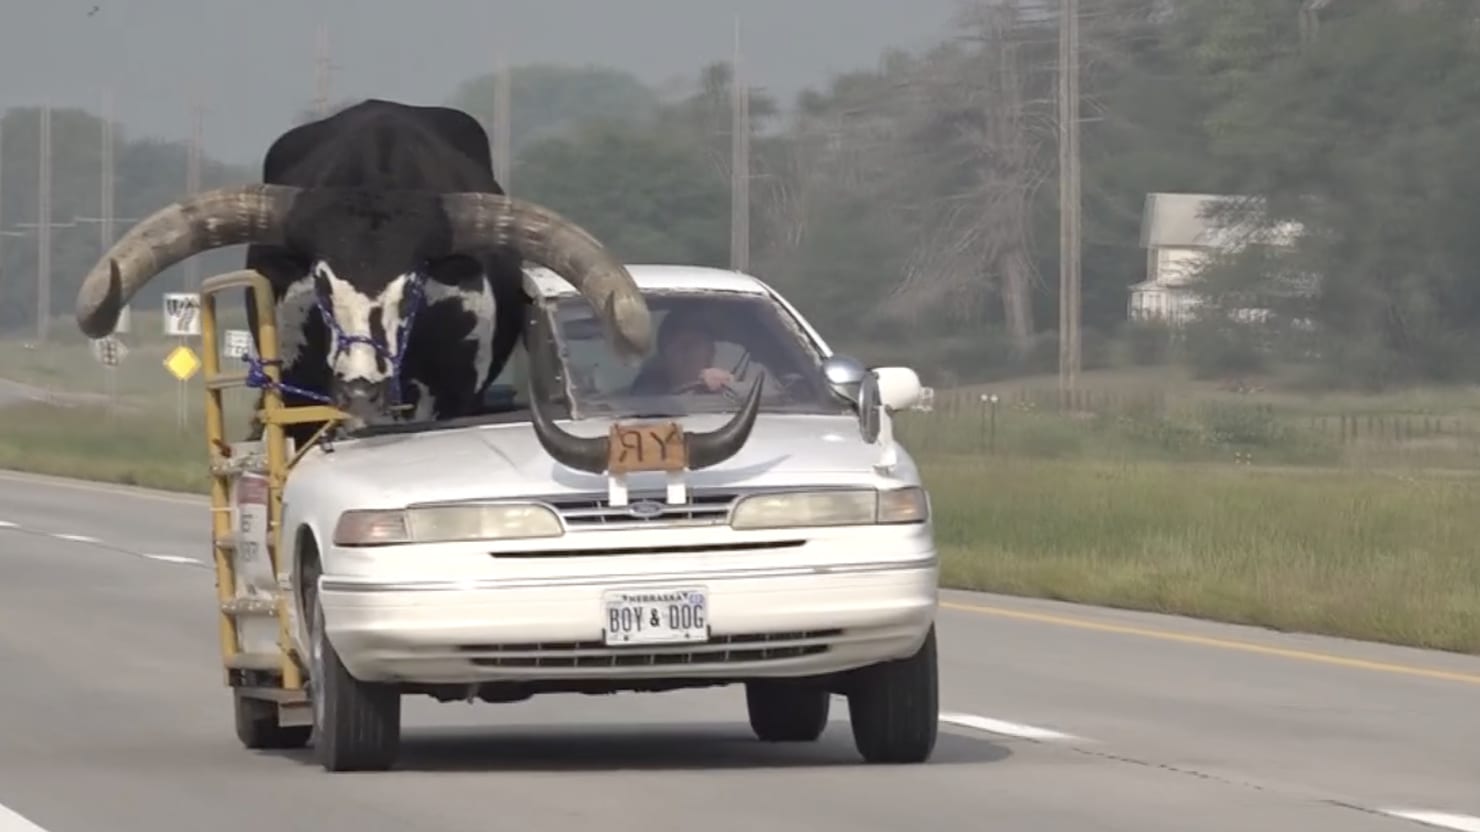 Man Pulled Over With Giant Live Bull Riding Shotgun pic